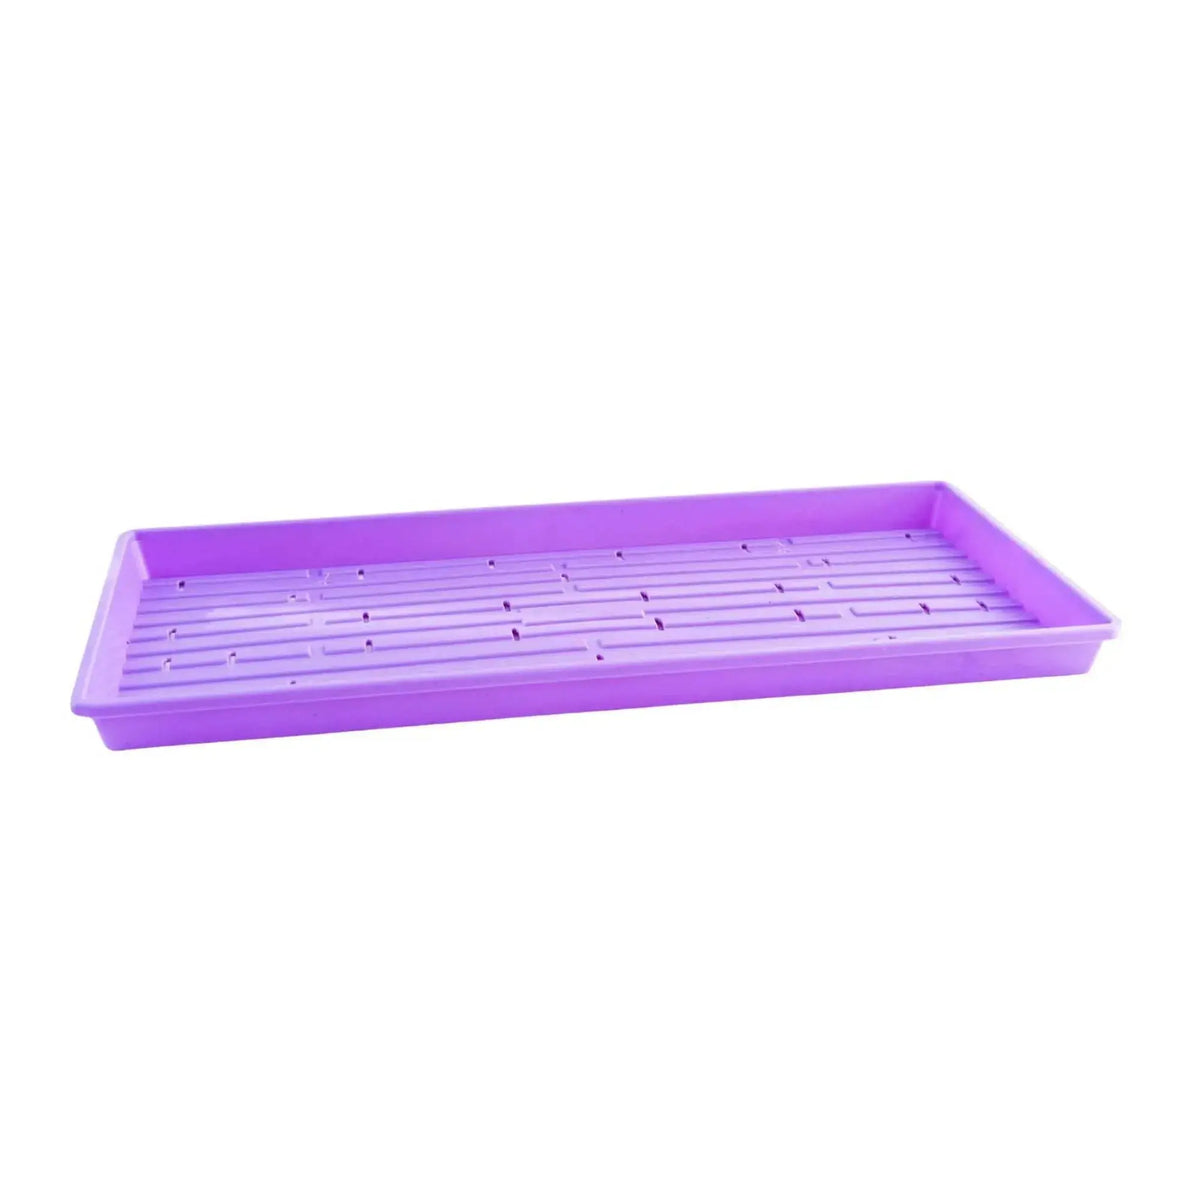 Bootstrap Farmer 1020 Shallow Extra Strength Microgreen Trays, With Holes | Assorted Colors